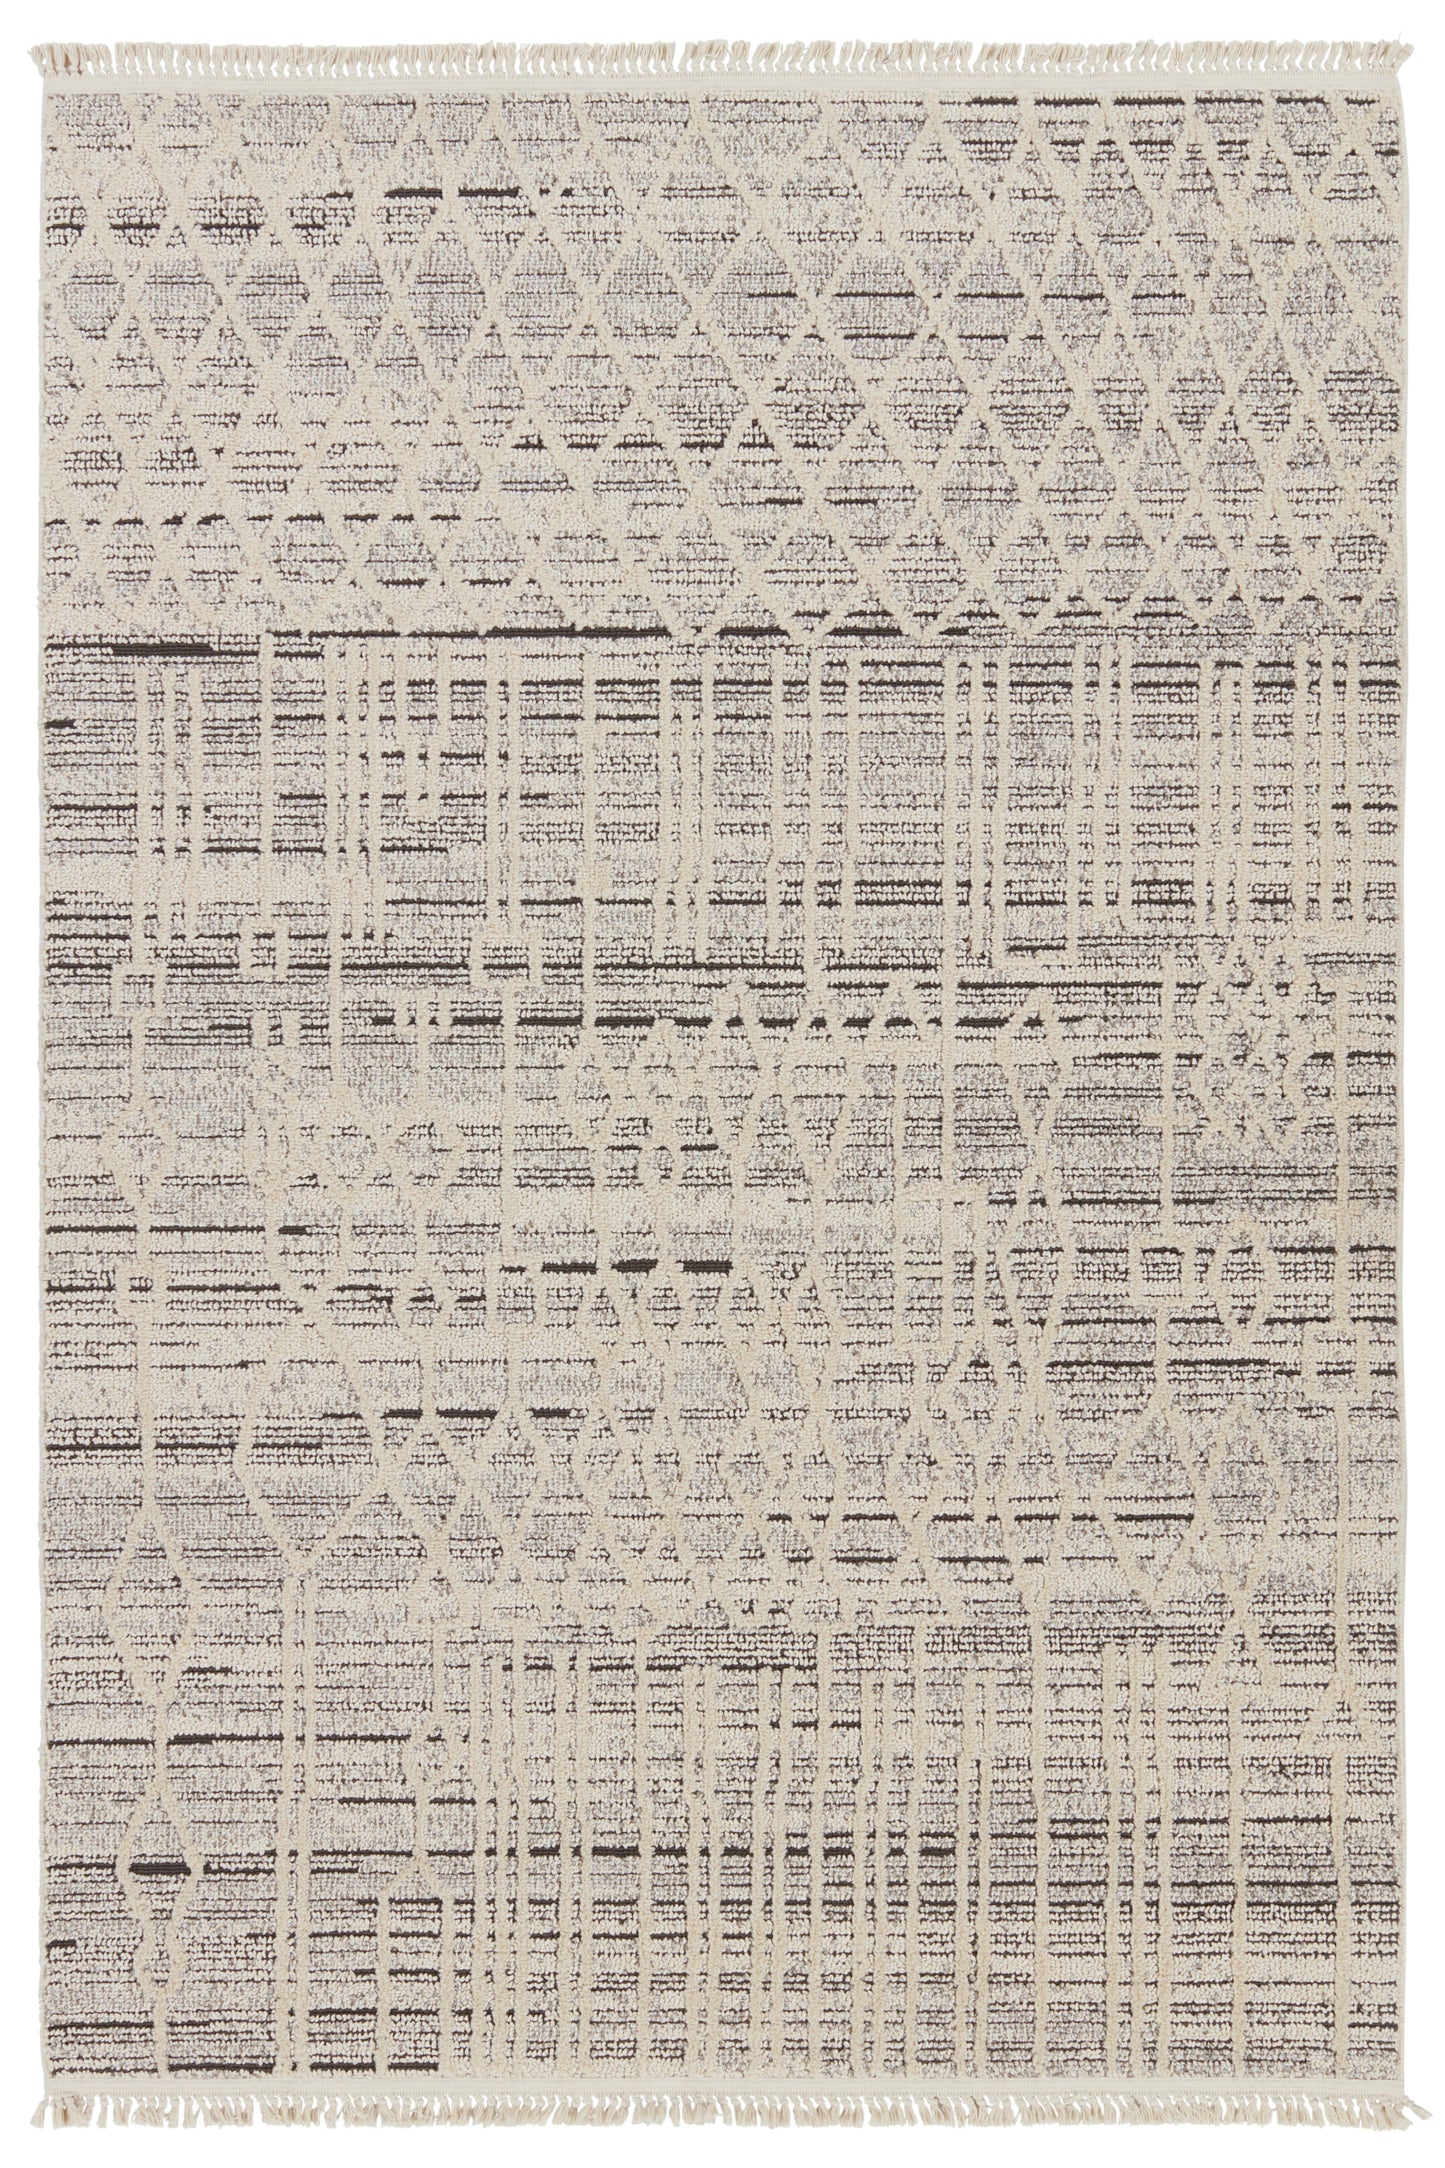 Lore Caiya Machine Made Synthetic Blend Indoor Area Rug From Jaipur Living